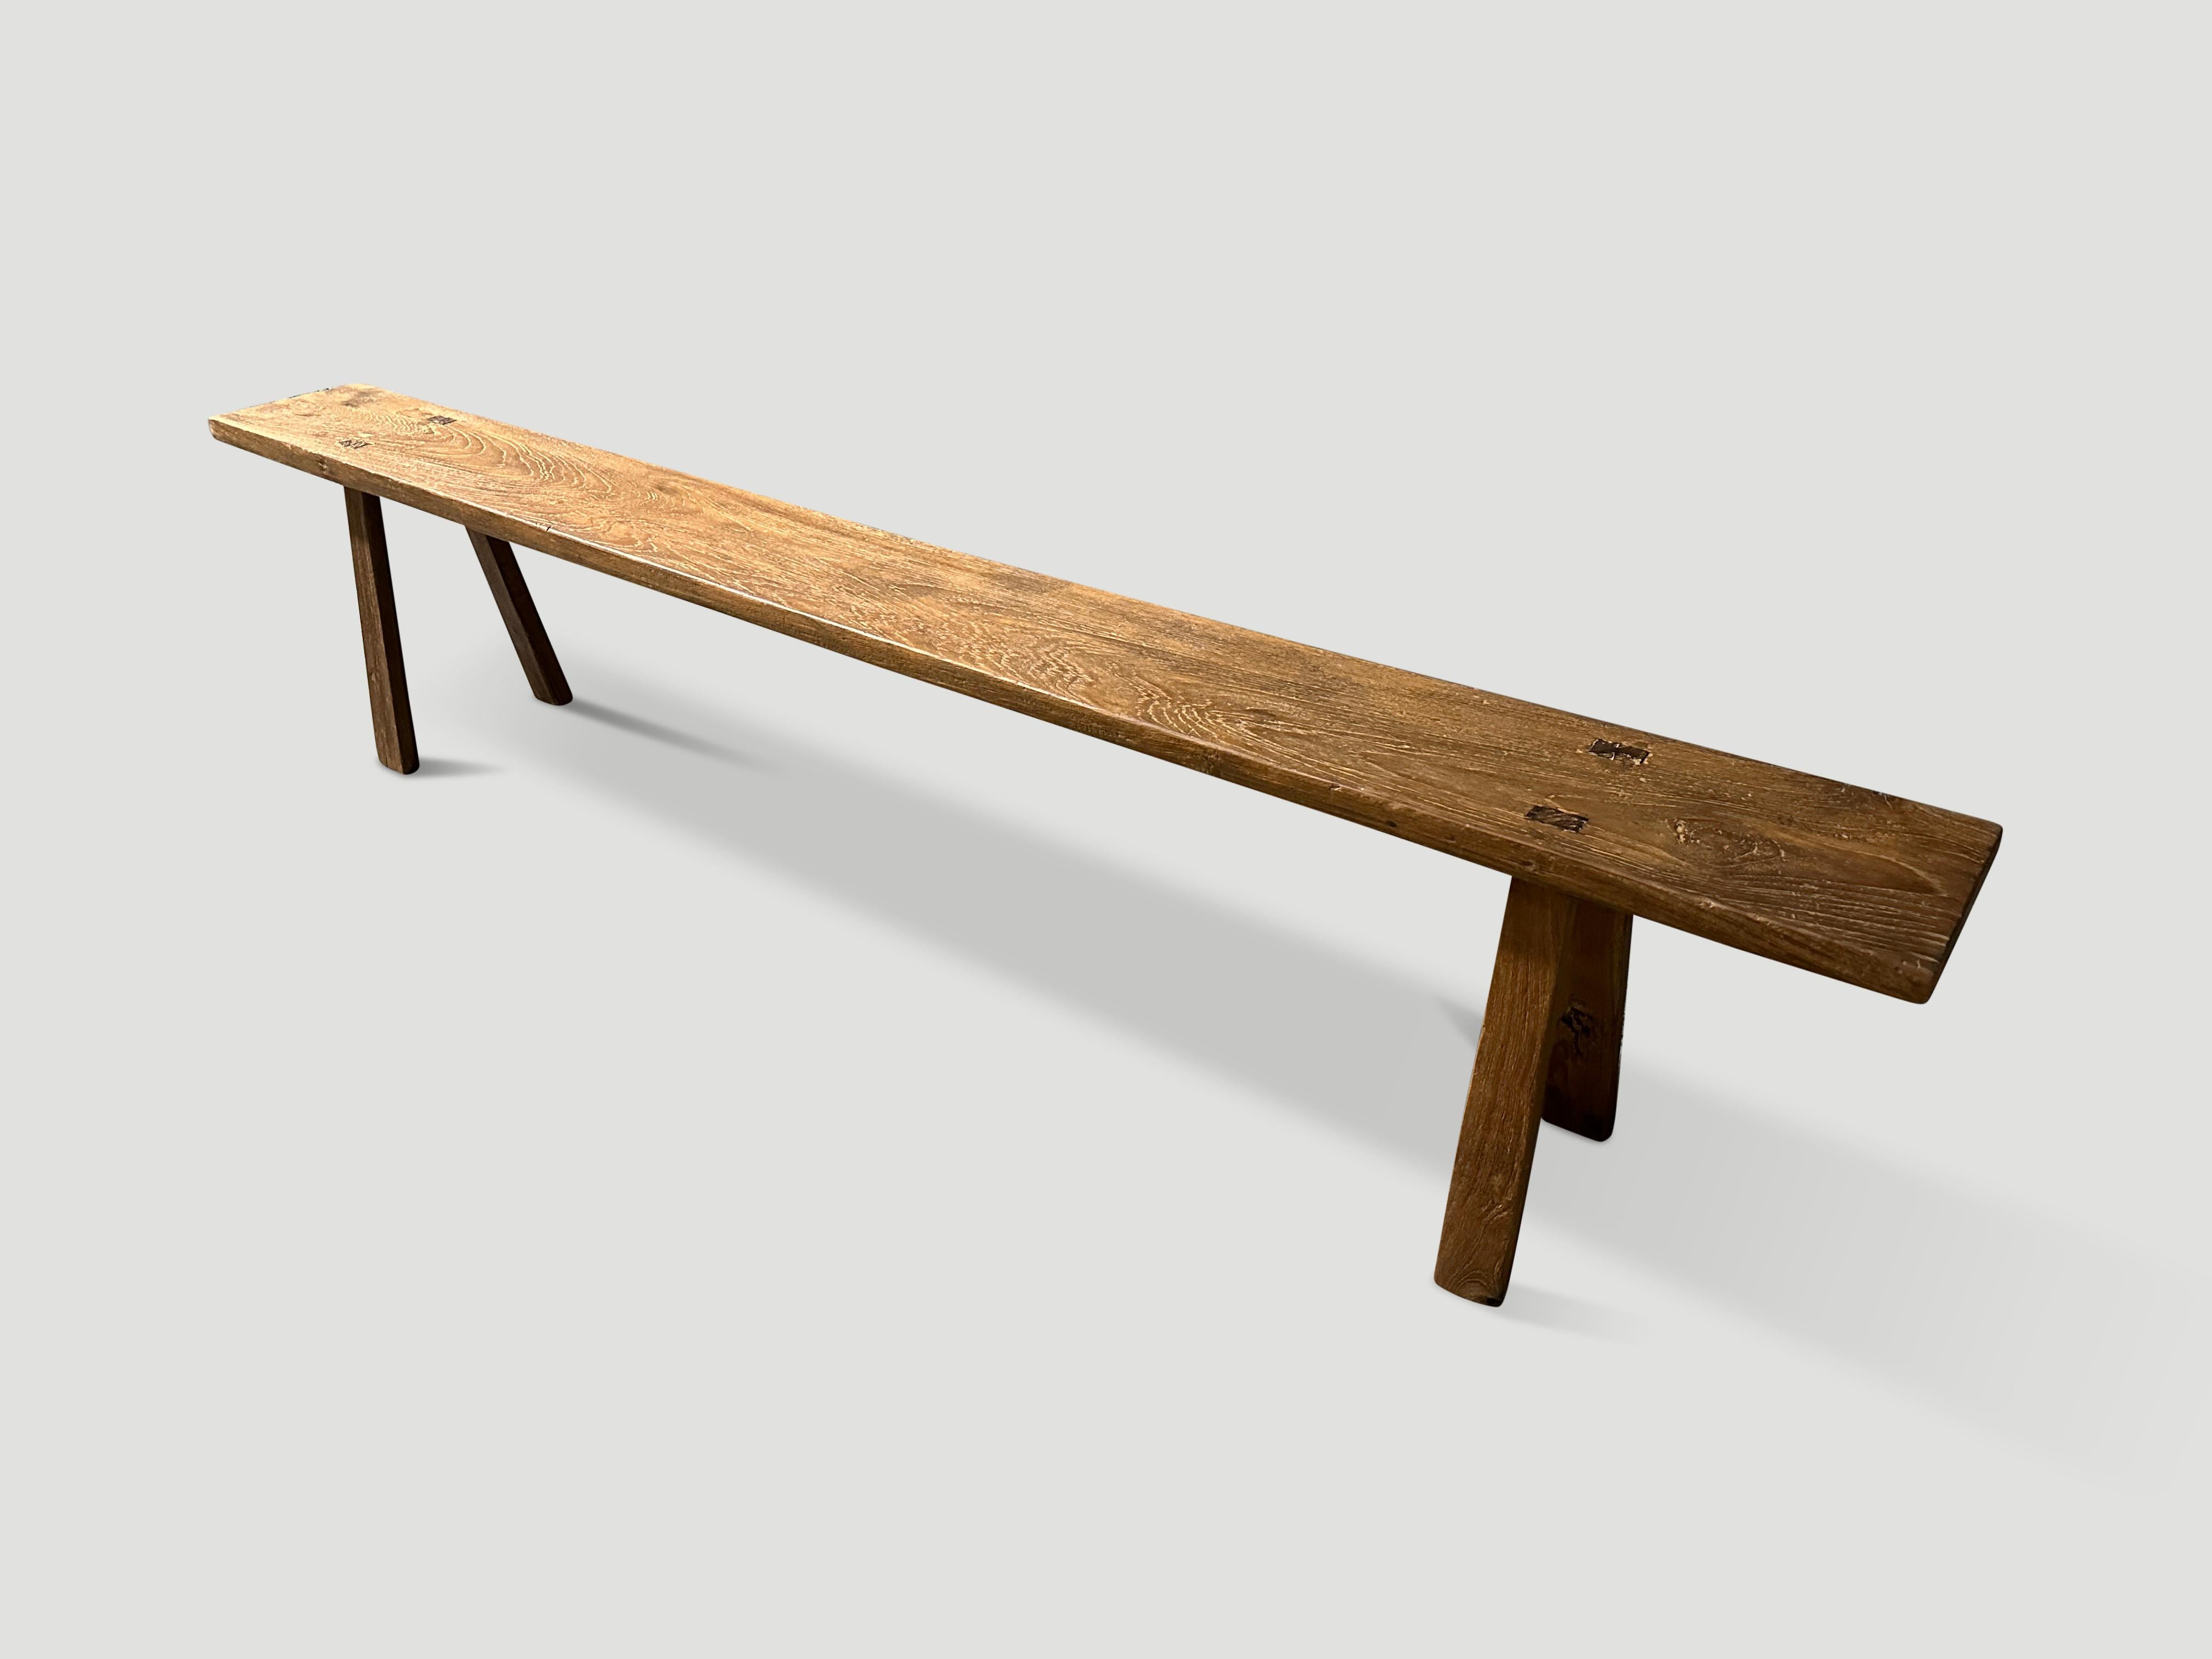 Andrianna Shamaris Antique Teak Wood Wabi Bench  In Excellent Condition For Sale In New York, NY